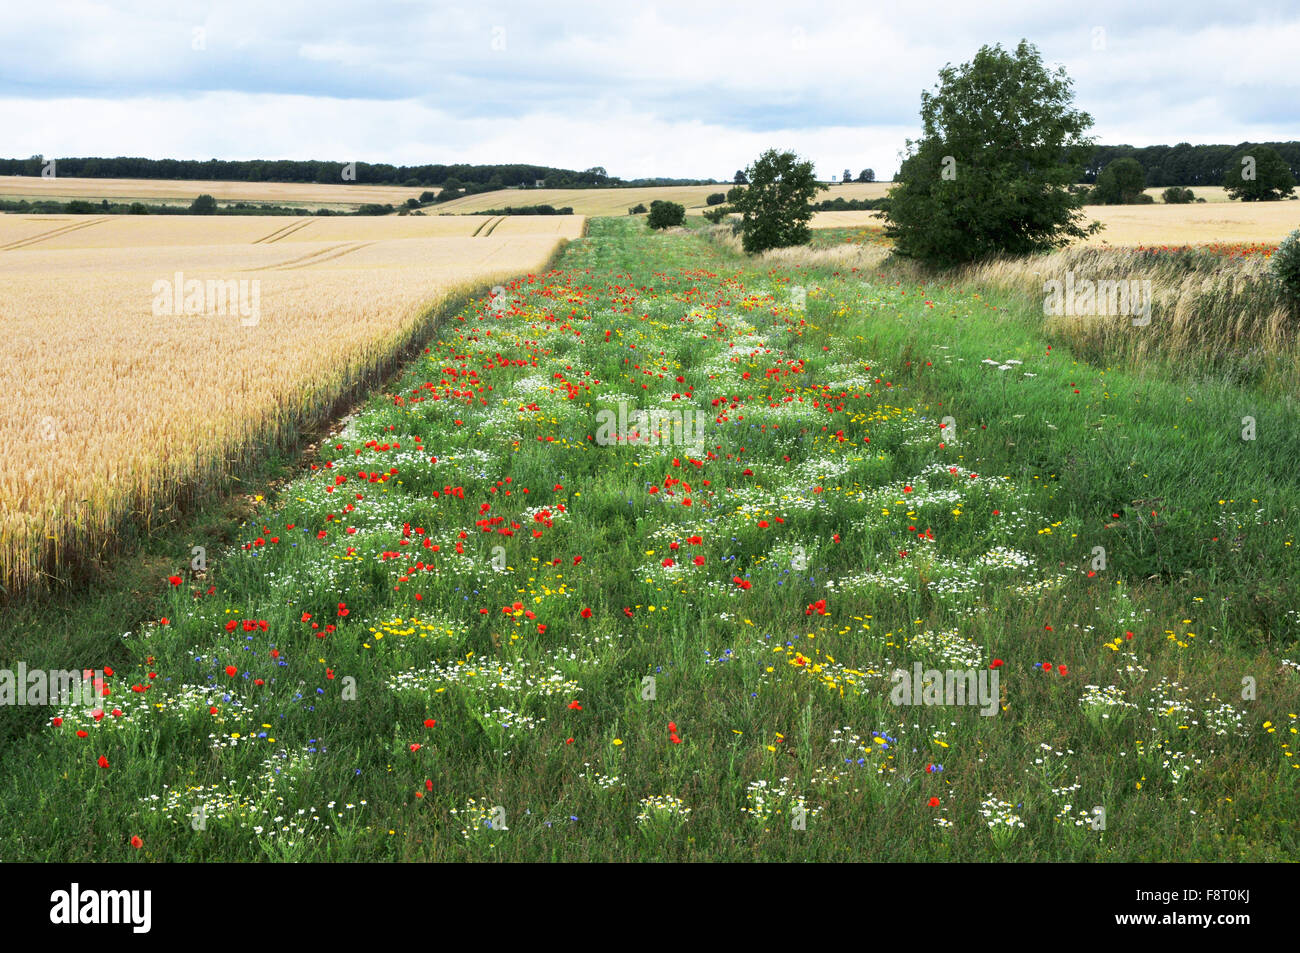 border of field showing natural wild flowers Stock Photo